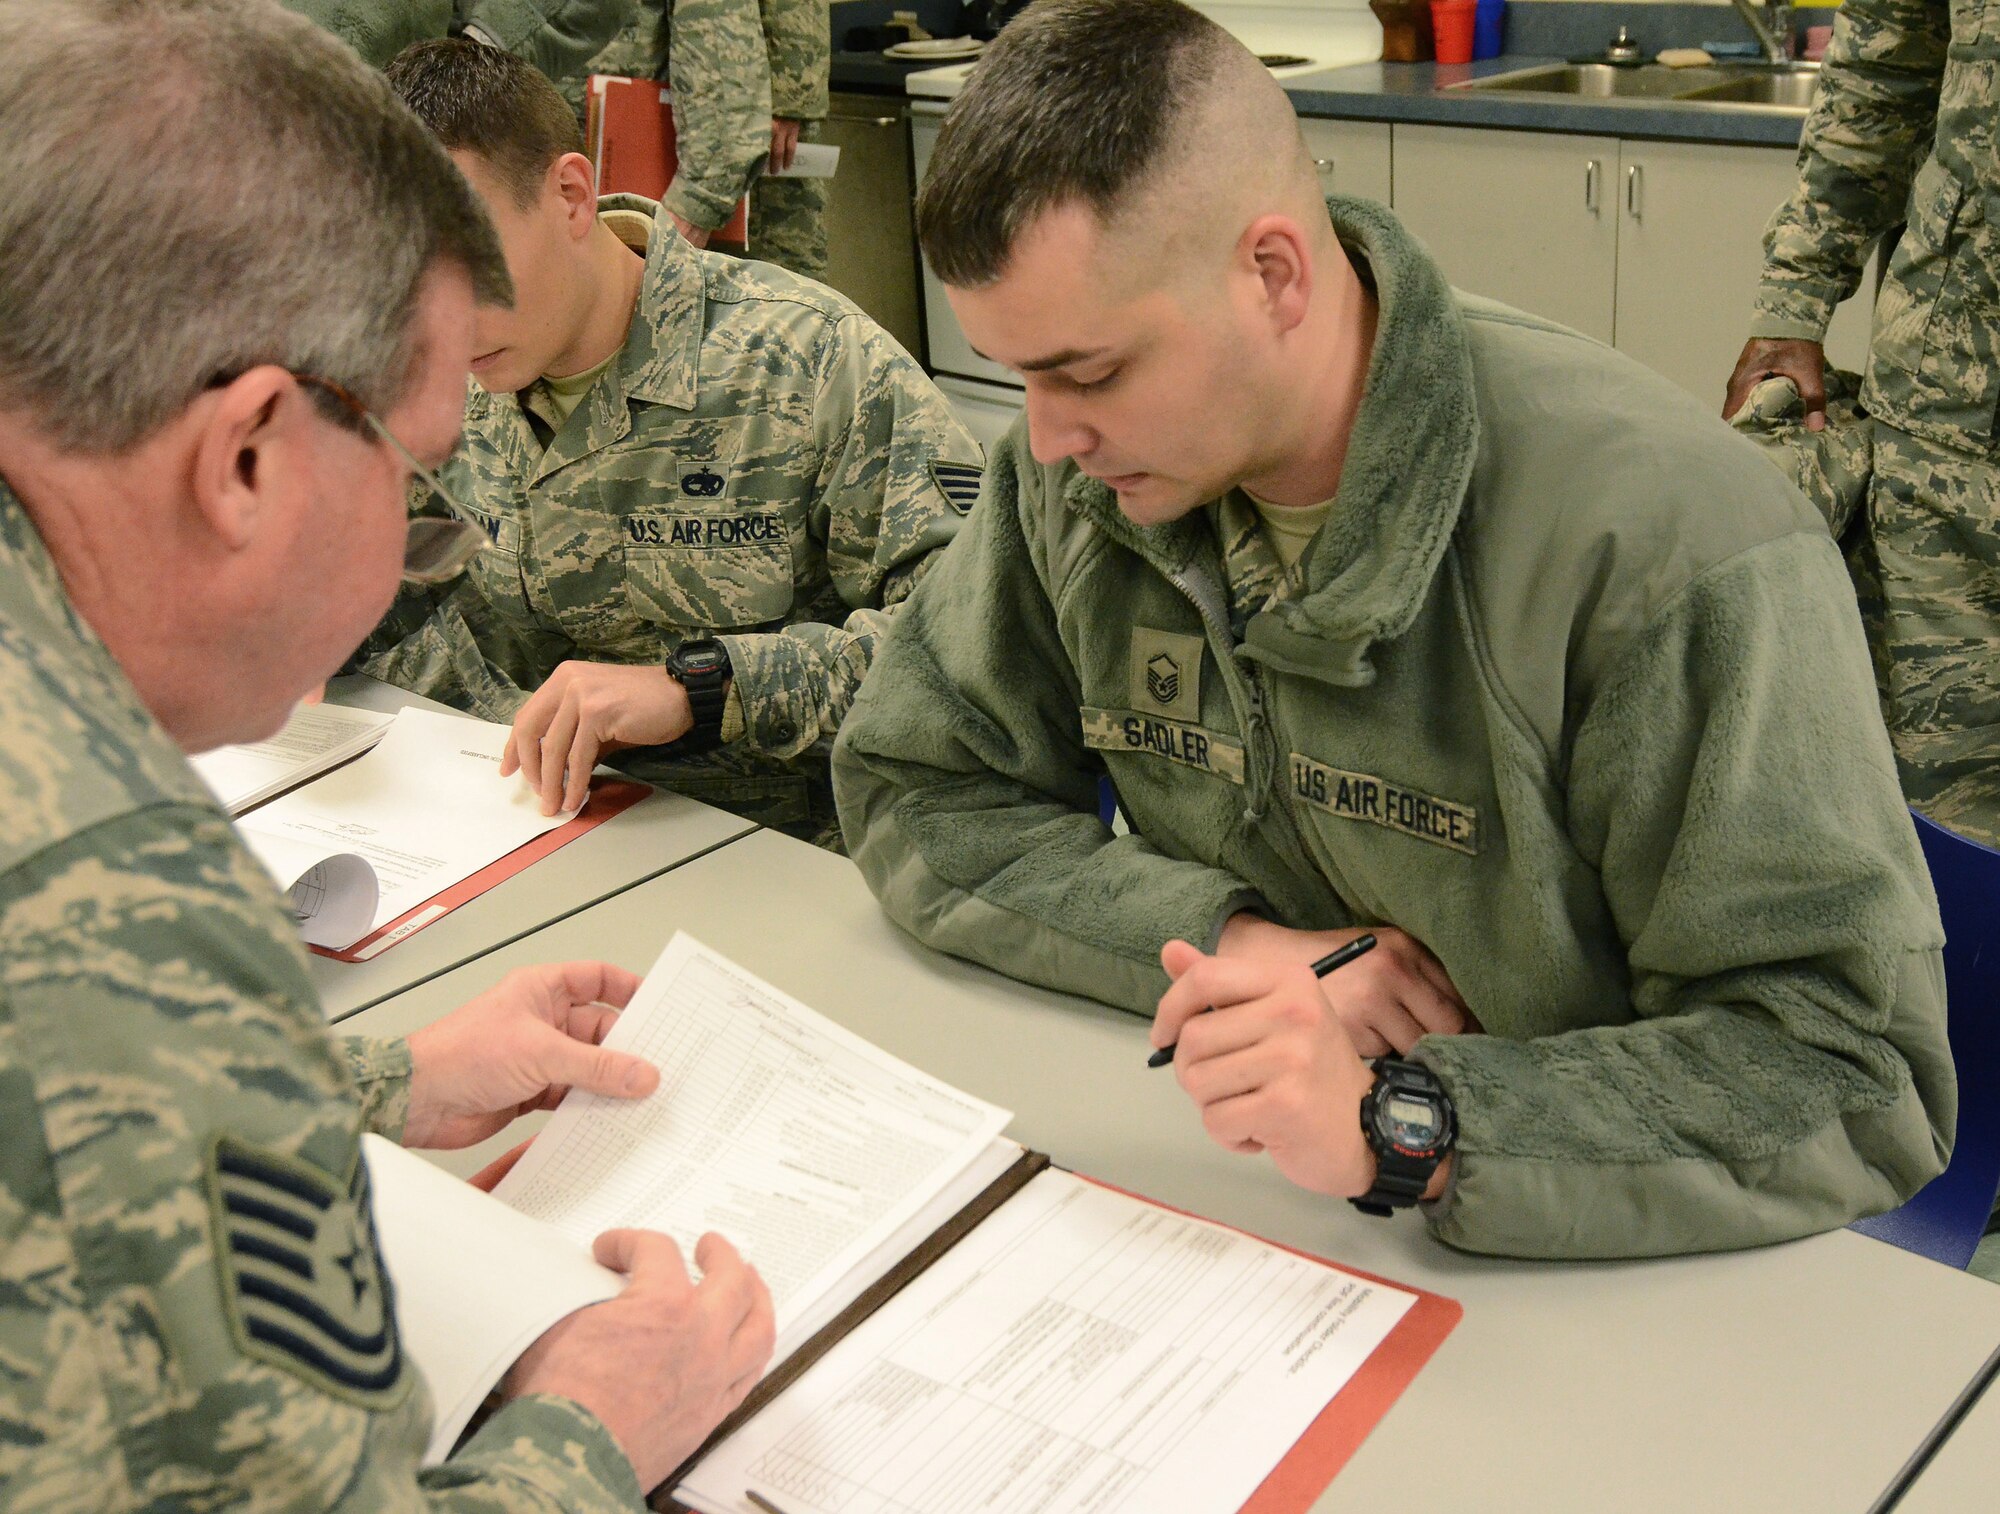 Master Sgt. Jonathon Sadler reviews his mobility folder with Tech. Sgt. Alan McKibben, to ensure all information is correct and up to date for his deployment to Southwest Asia; Dobbins Air Reserve Base, Ga., Jan. 2, 2015. (U.S. Air Force photo/Brad Fallin)